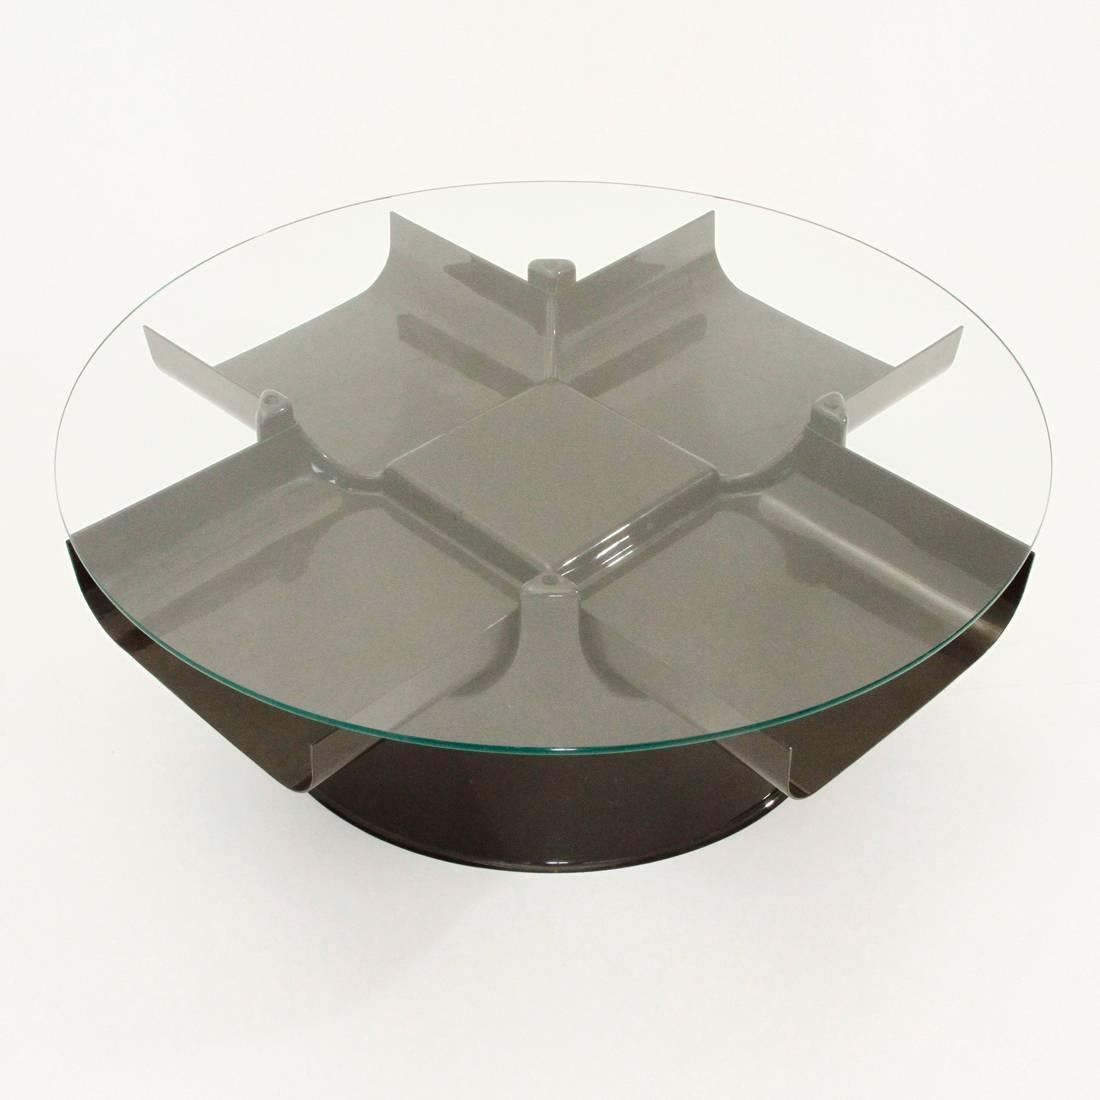 Table 60 of circular shape with four rack compartments.
Brown plastic structure with a circular glass plate
Good general condition, small break in a corner.